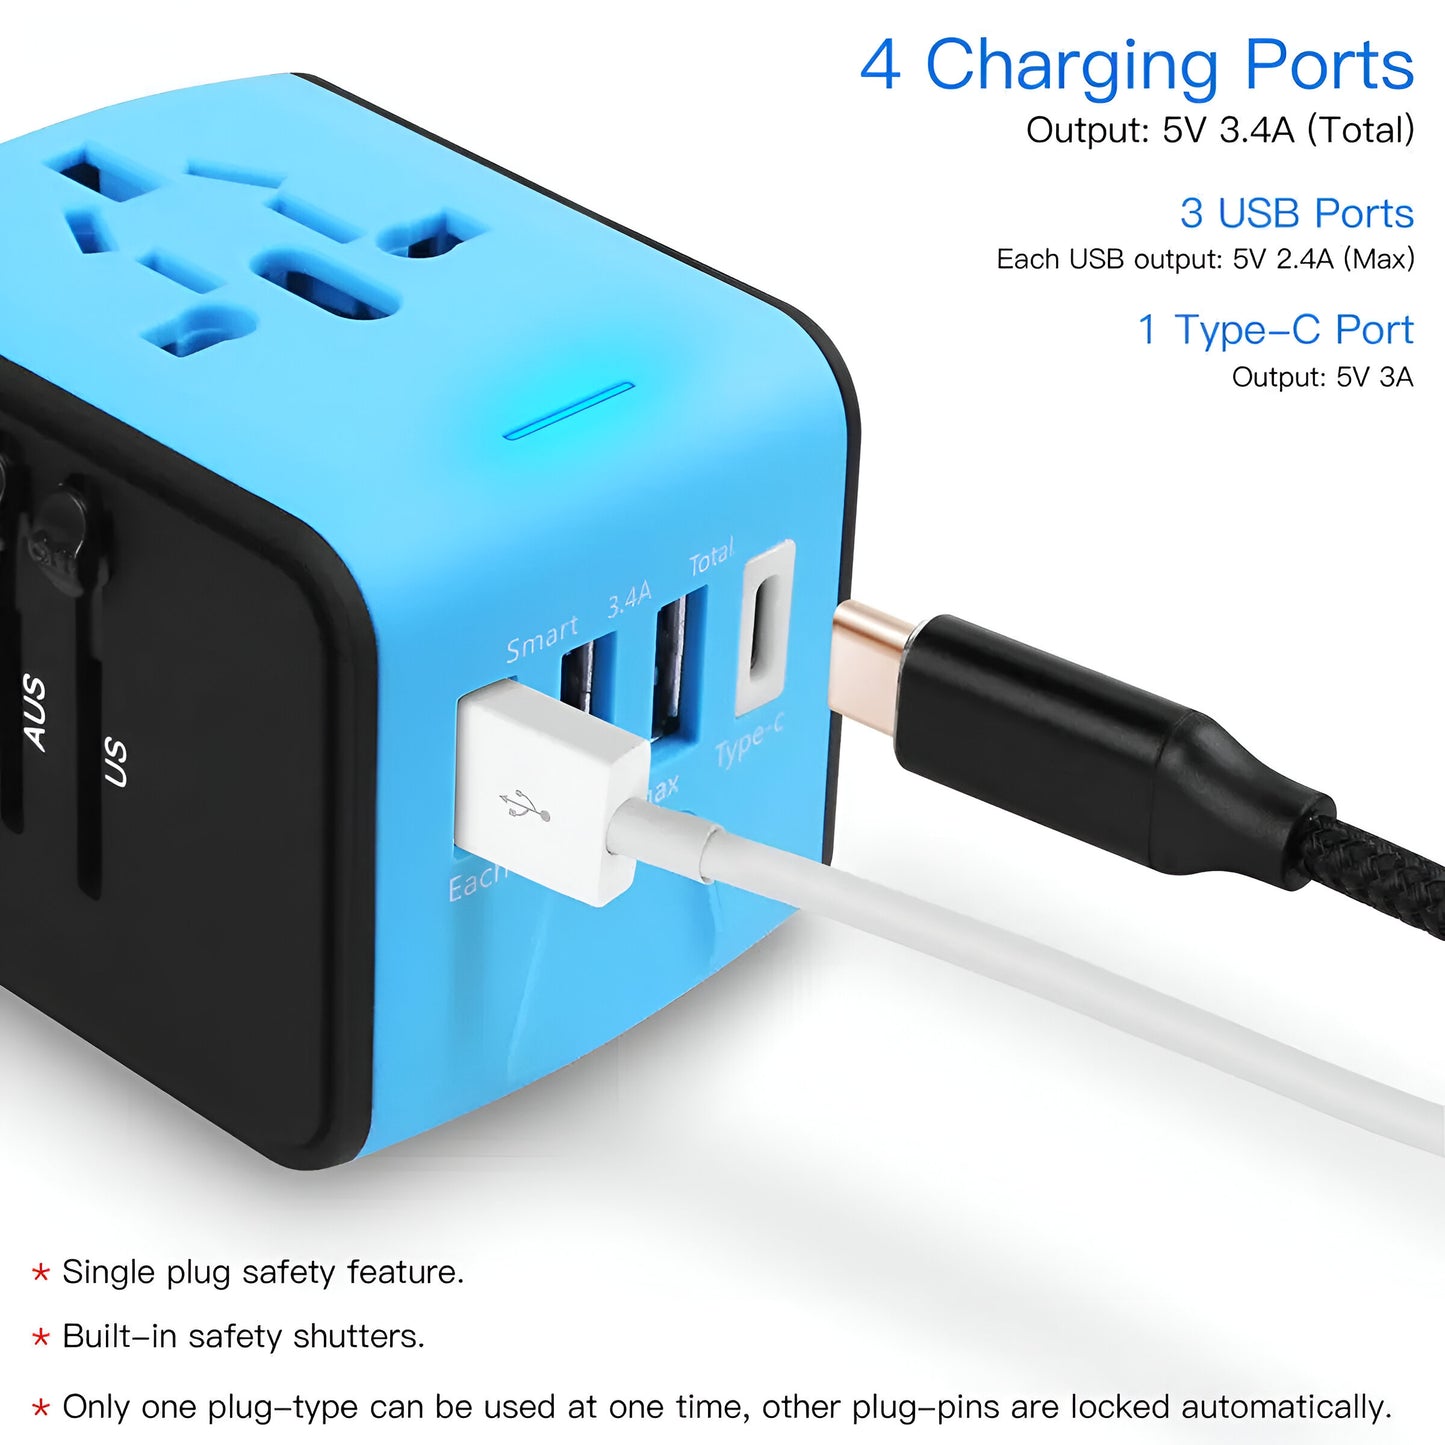 VersaVolt™: Charge Up Anywhere in the World!